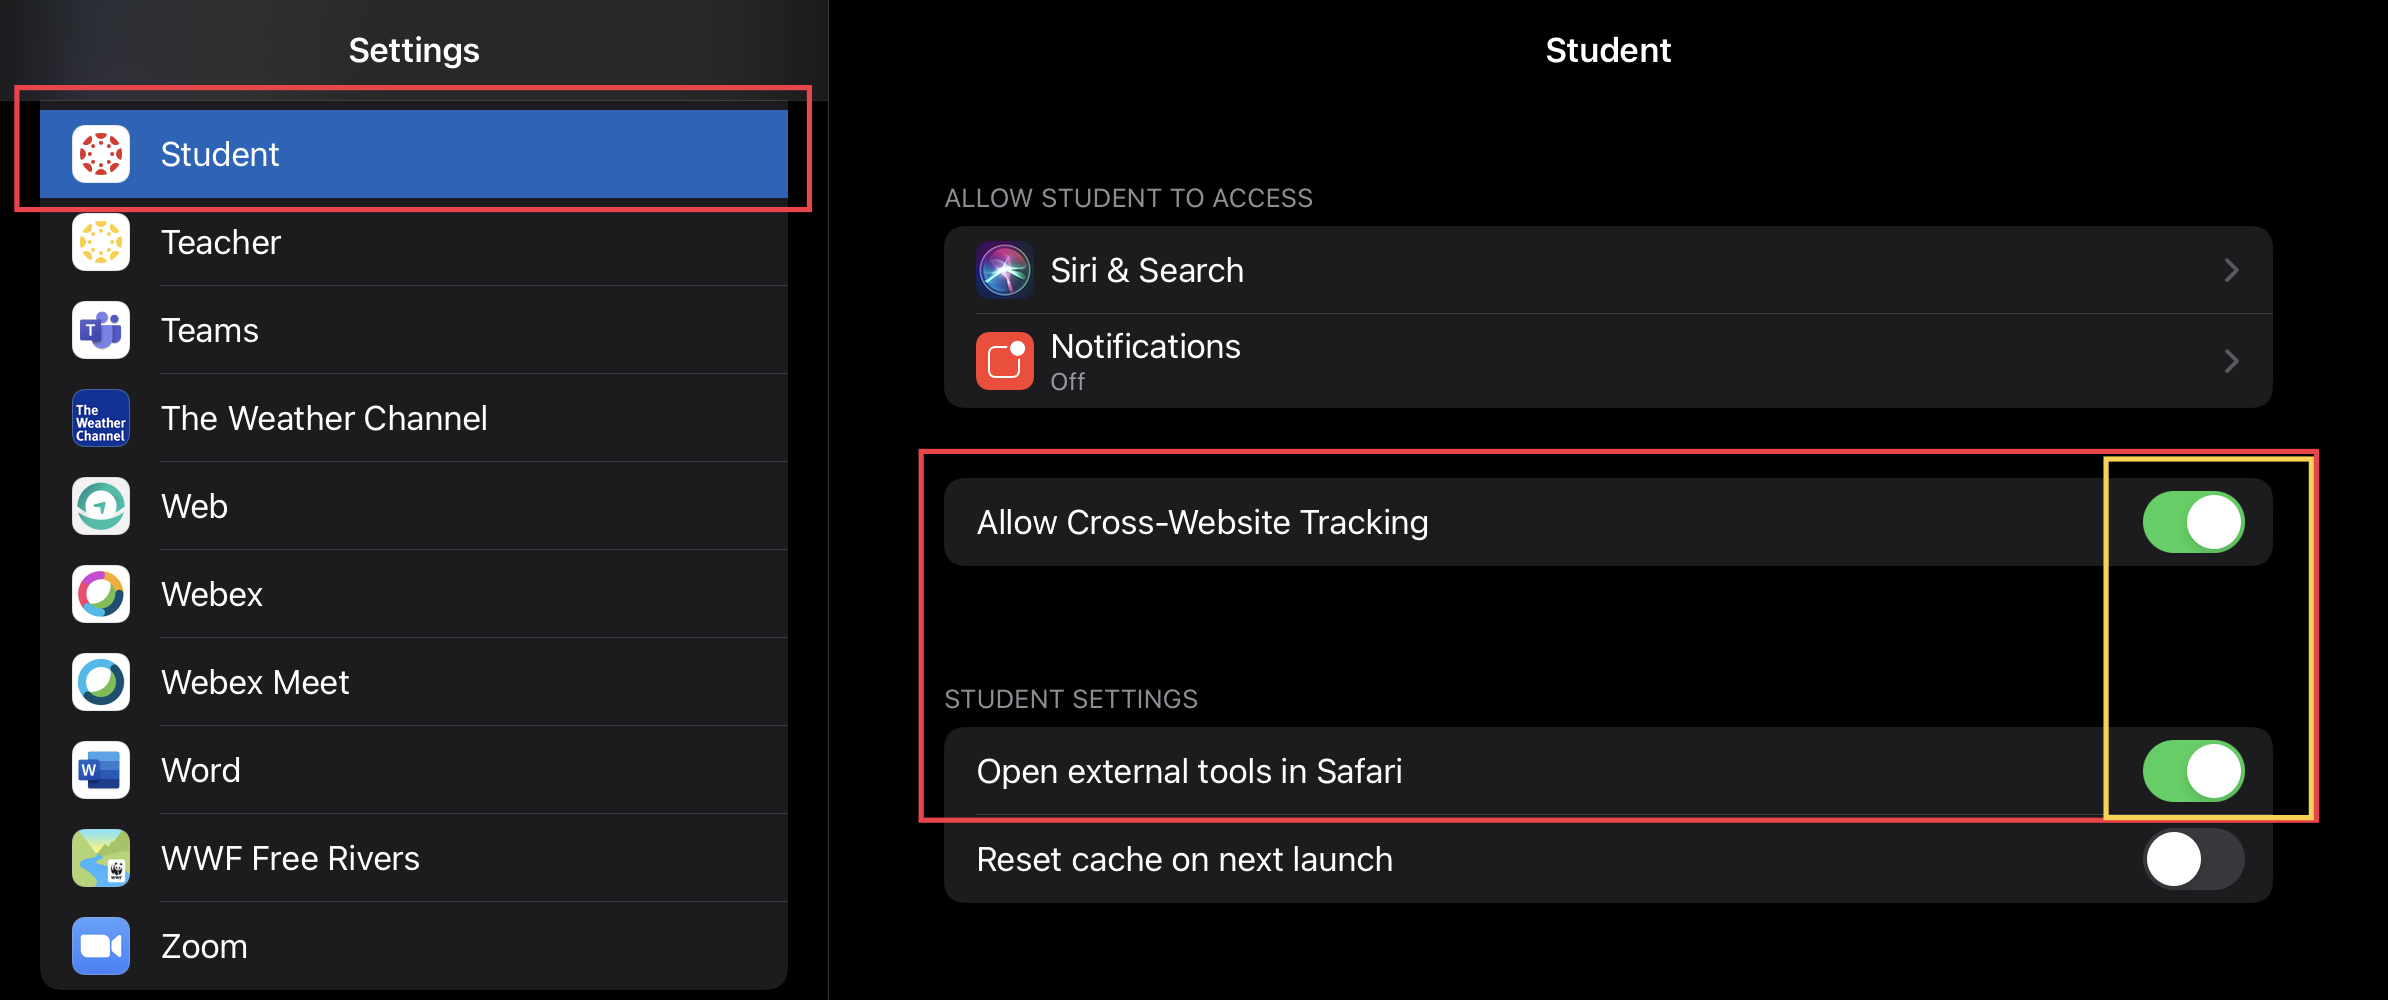 Gaphic: iOS Canvas Student app settings. Turn on both, "allow cross-website tracking" and "open external tools in Safari".